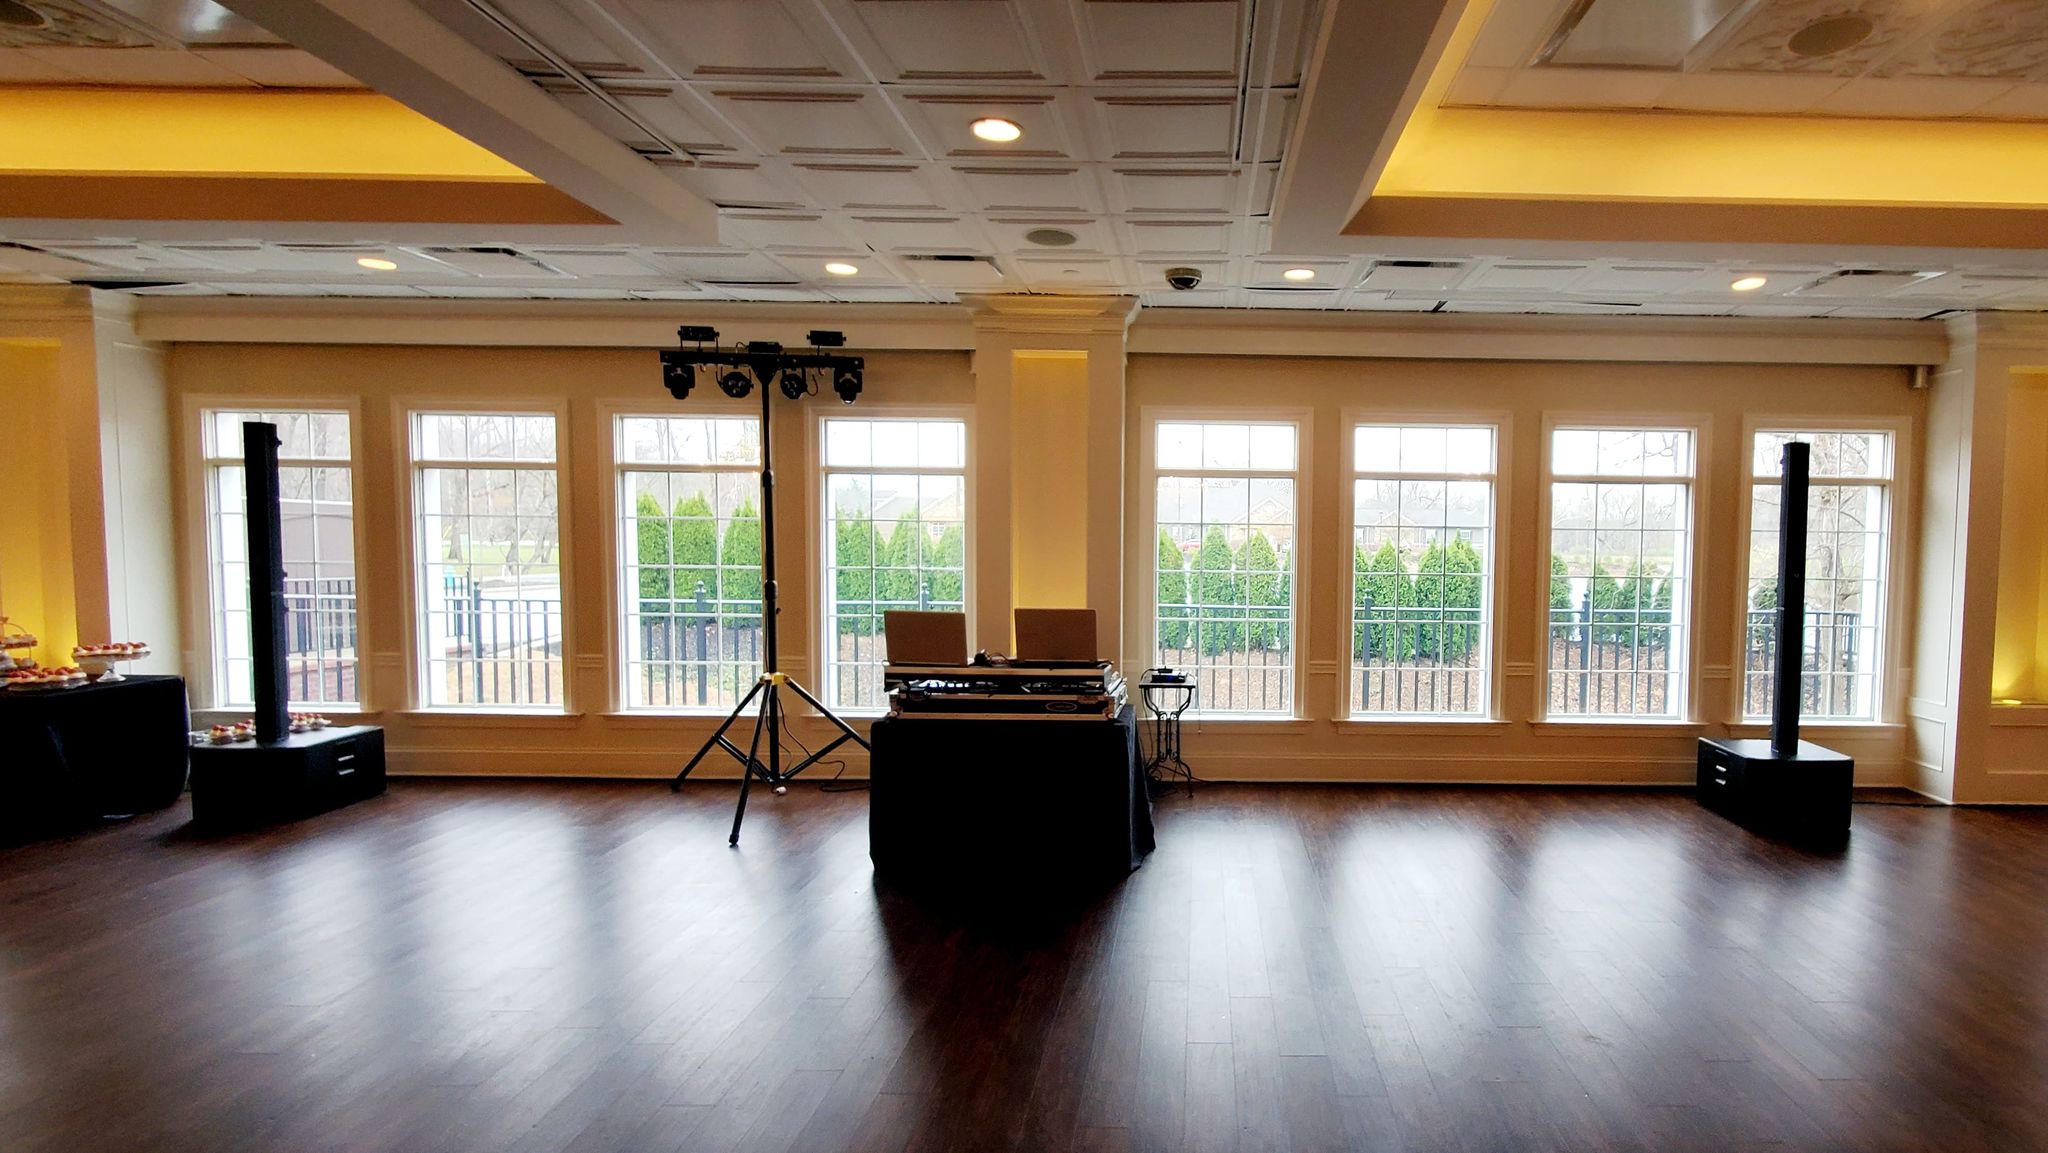 Less Is More when it comes to wedding dj set ups